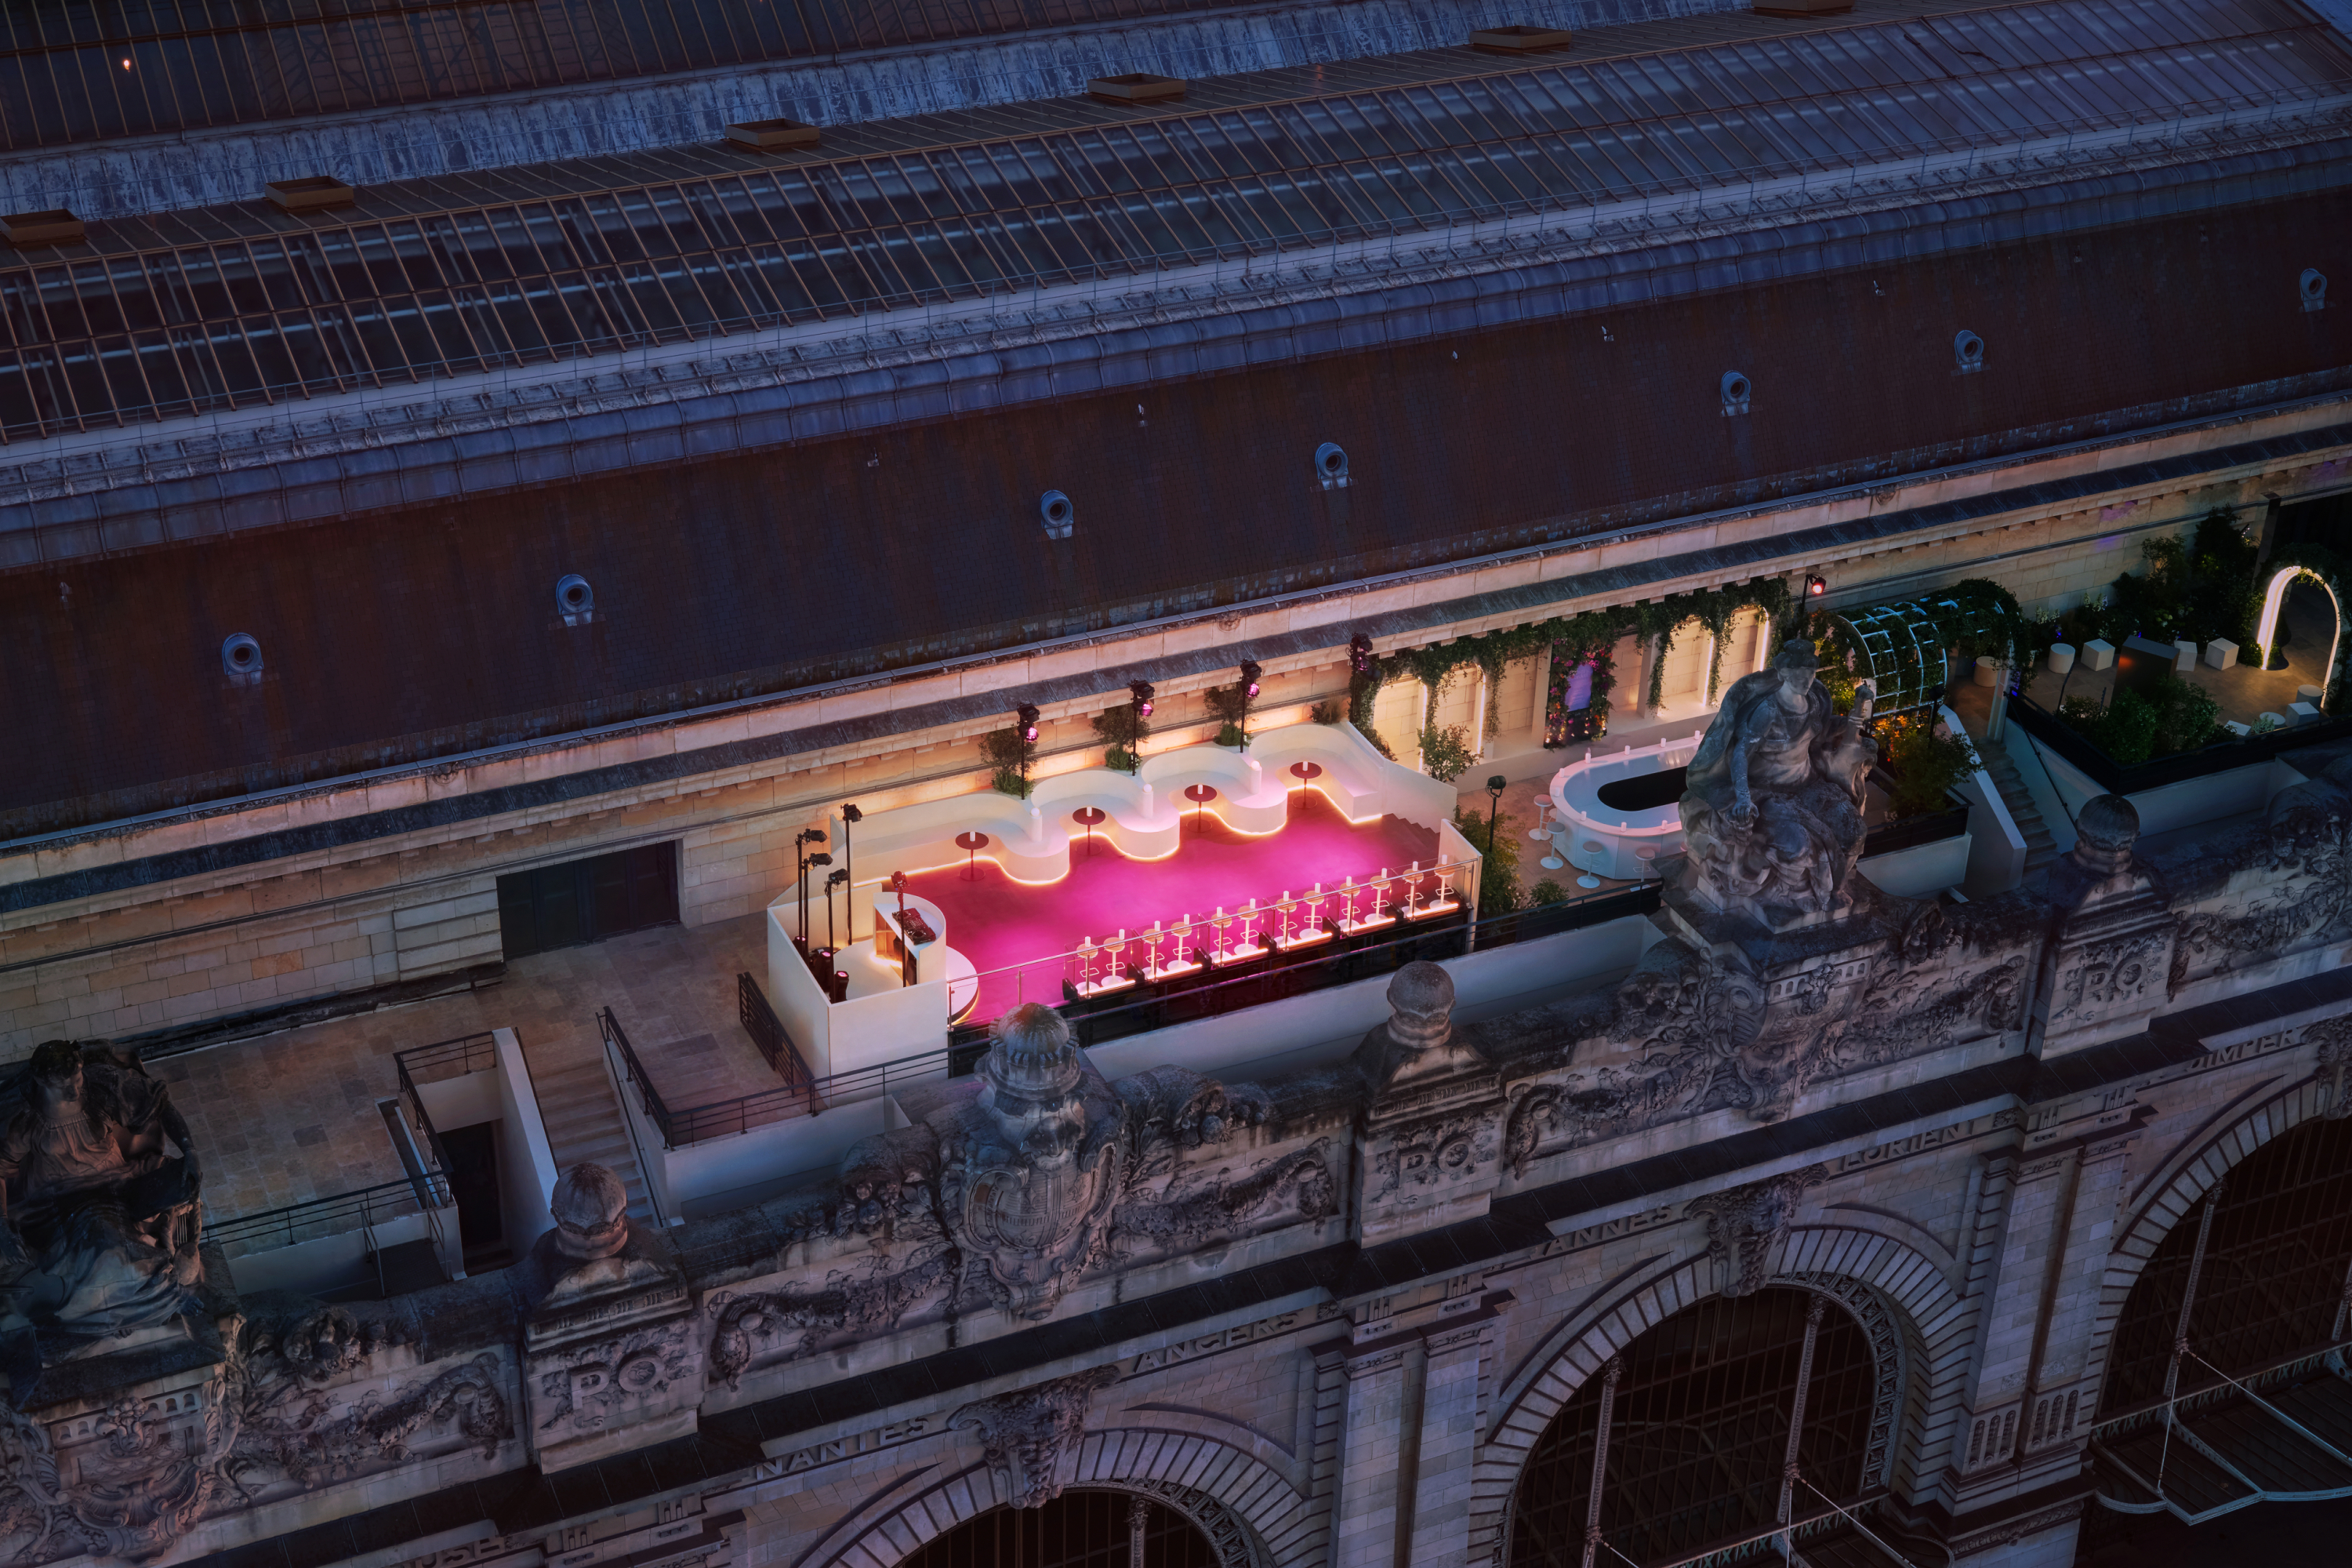 Aerial view of the terrace lit up at night, showing the tasting bar and stage area.